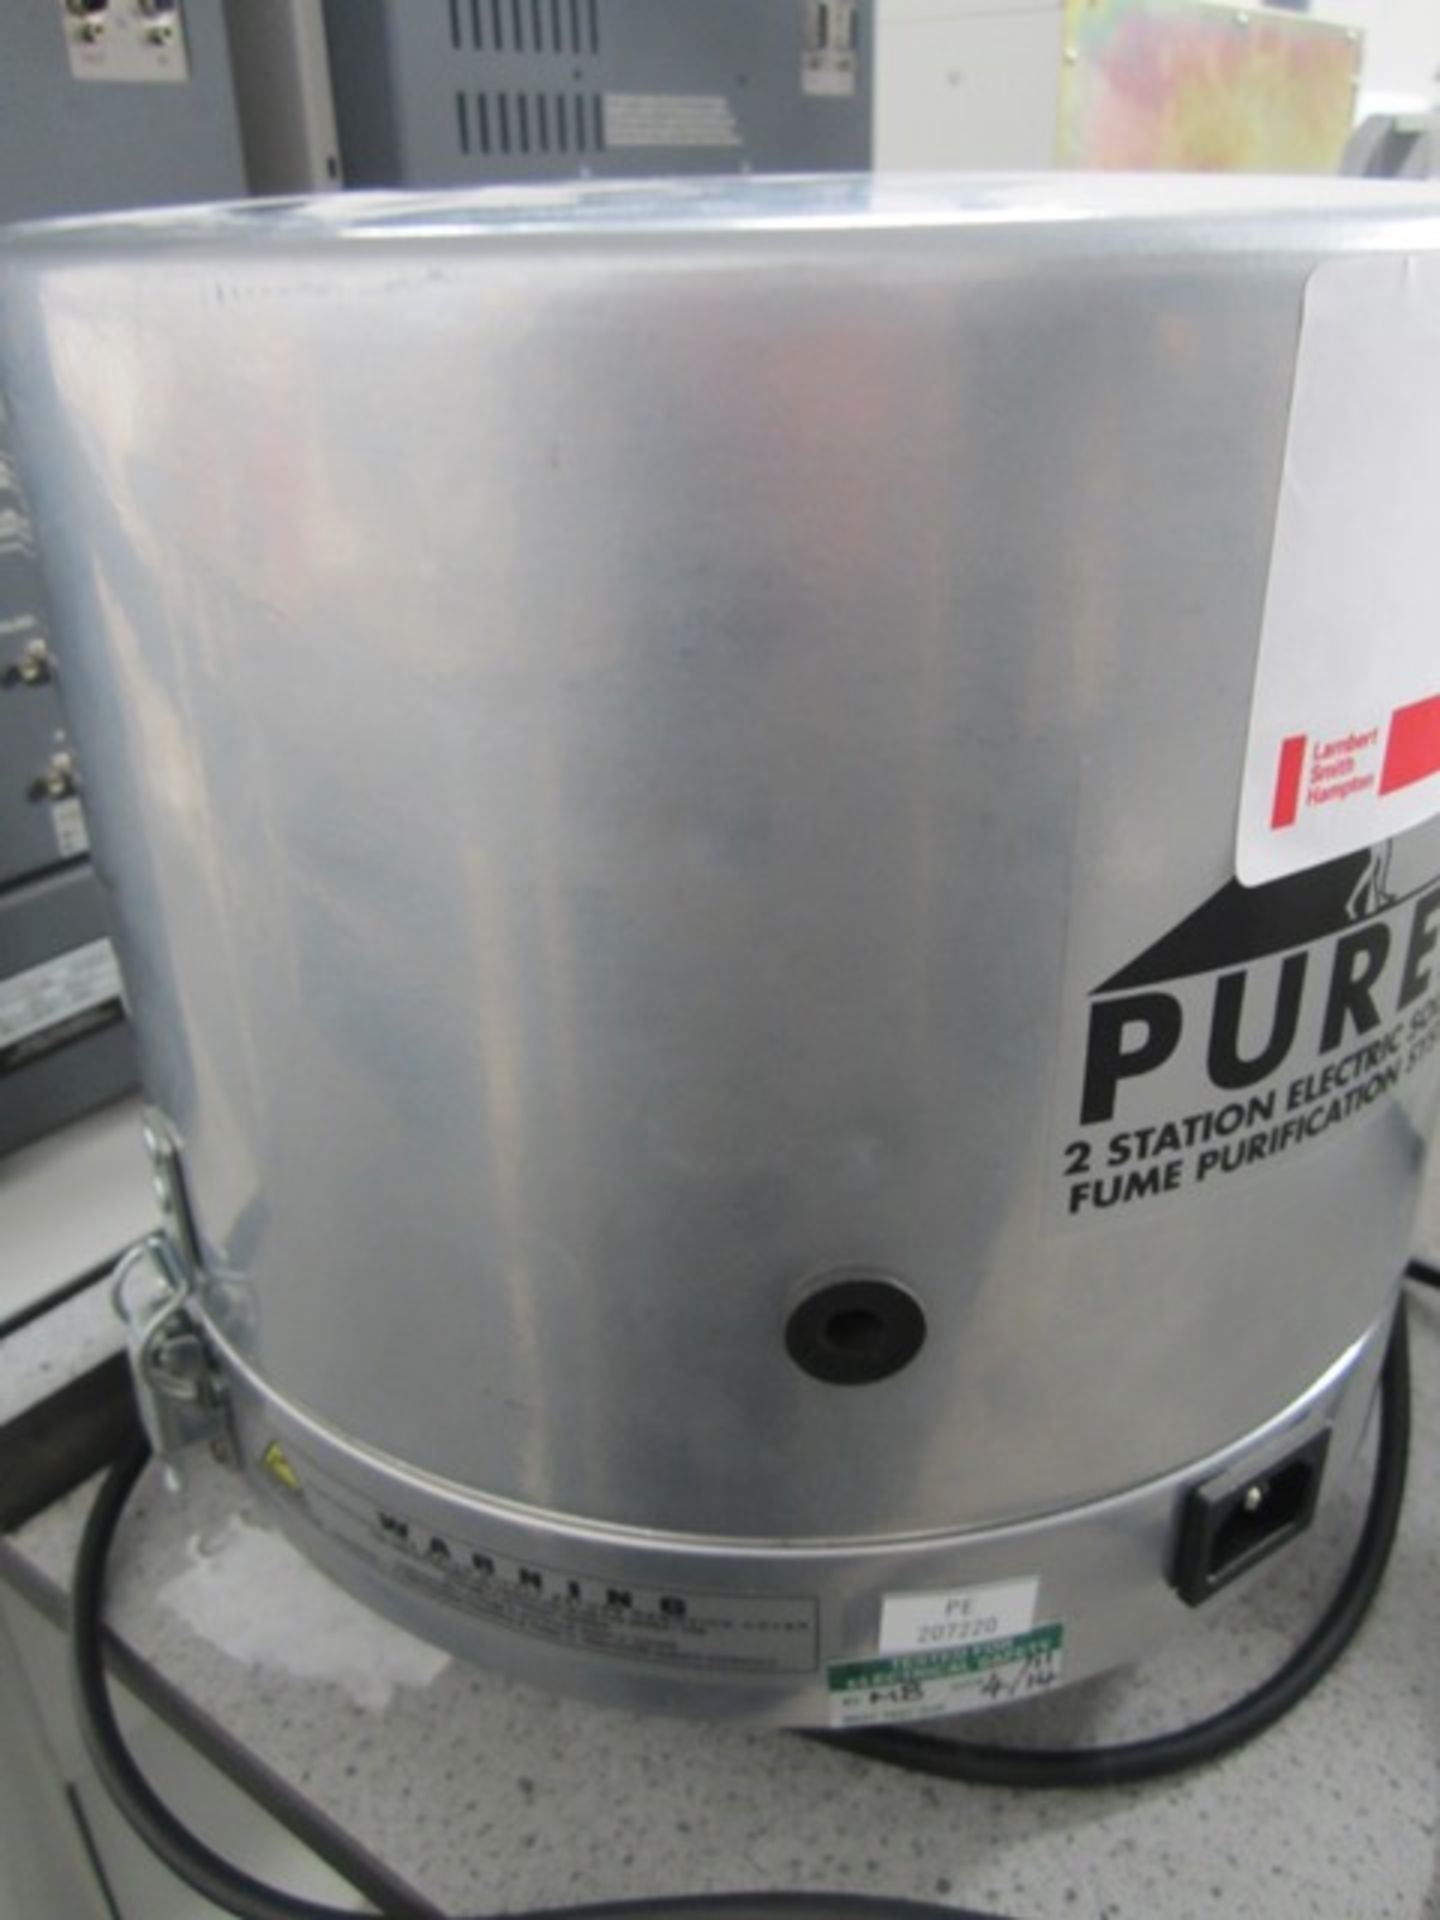 Purex  2 station electric fume purification system (height 50mm x width 75mm x depth 170mm) - Image 2 of 2